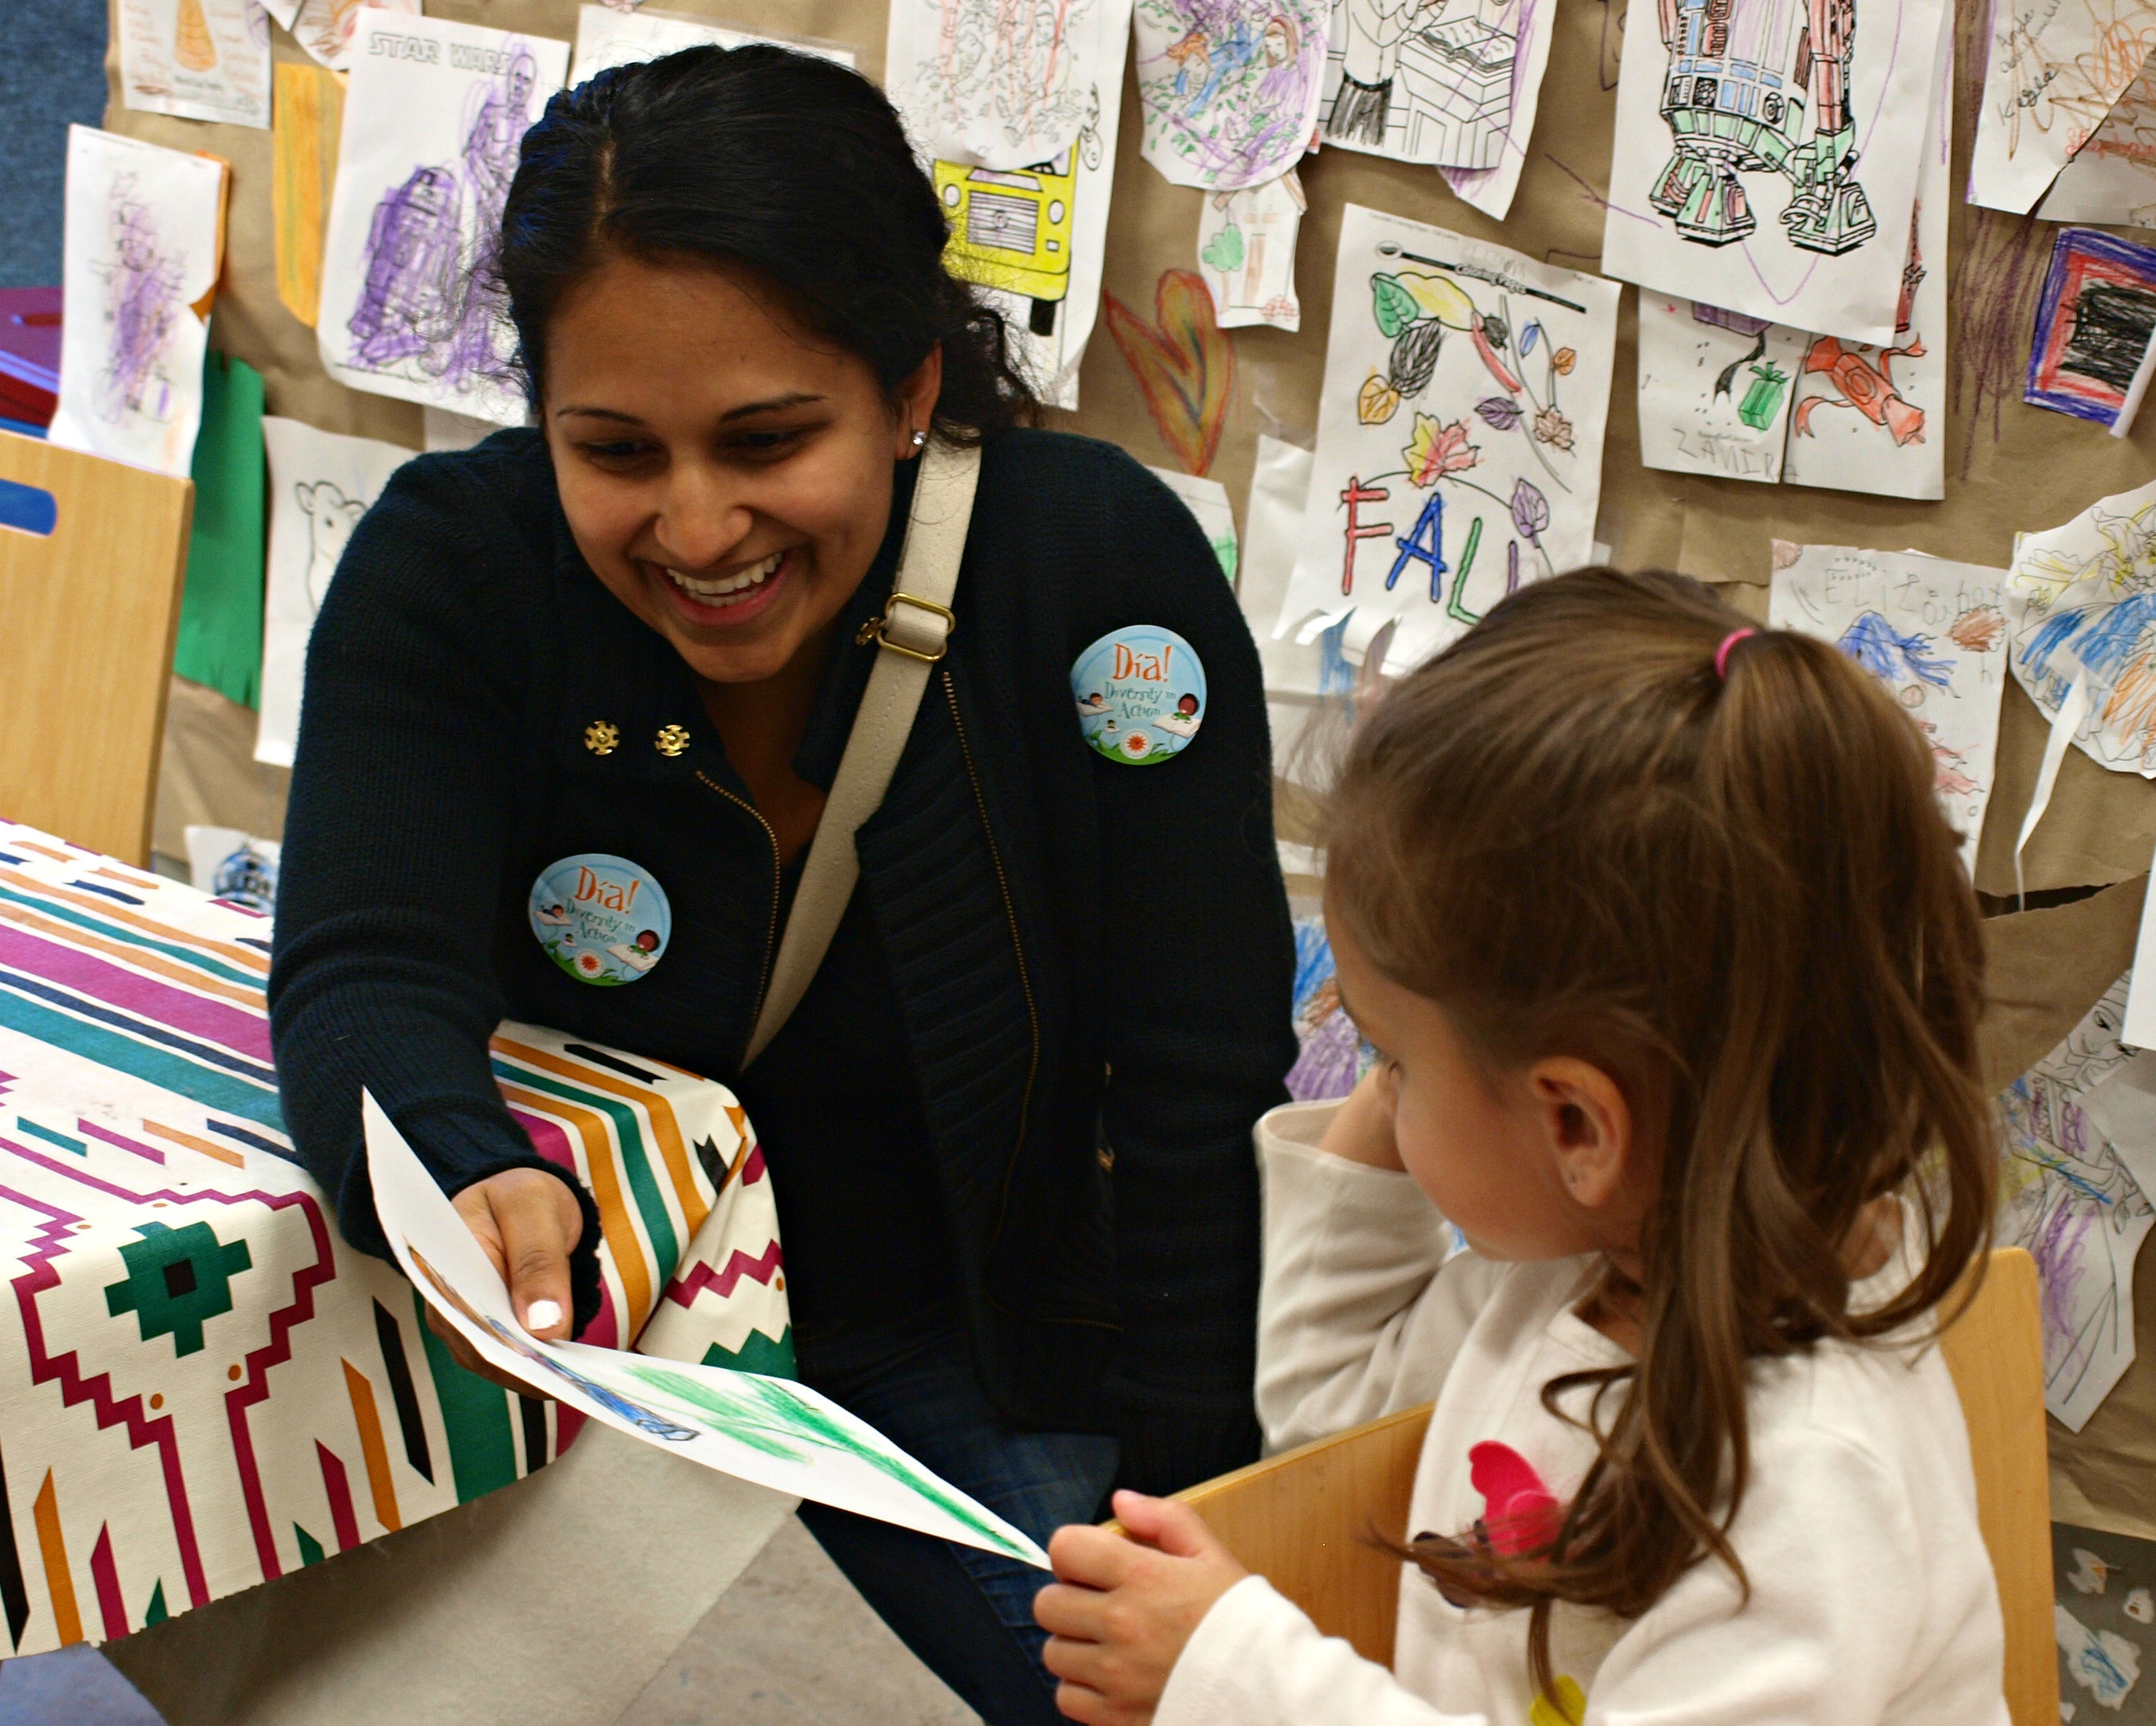 Families at Skokie Public Library in Illinois participate in a Dia program (photo courtesy of the Association for Library Service to Children)."